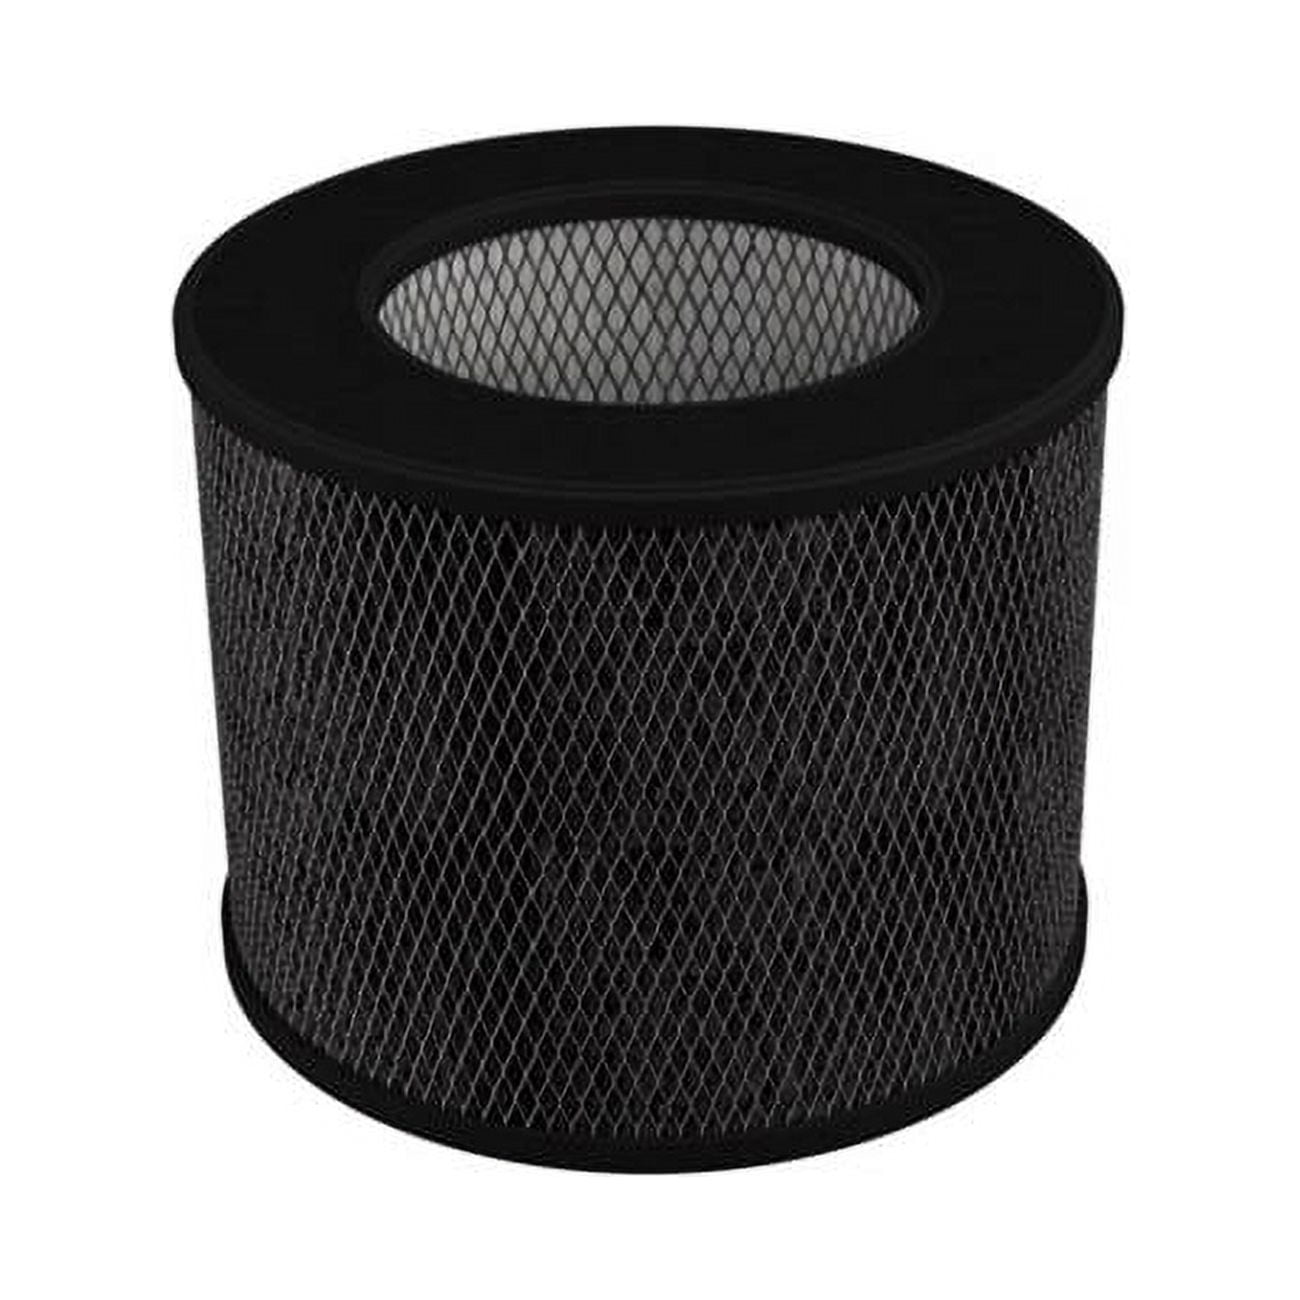 Picture of Envion 6073044 5.1 x 5.1 in. TP150 Round Air Purifier Filter